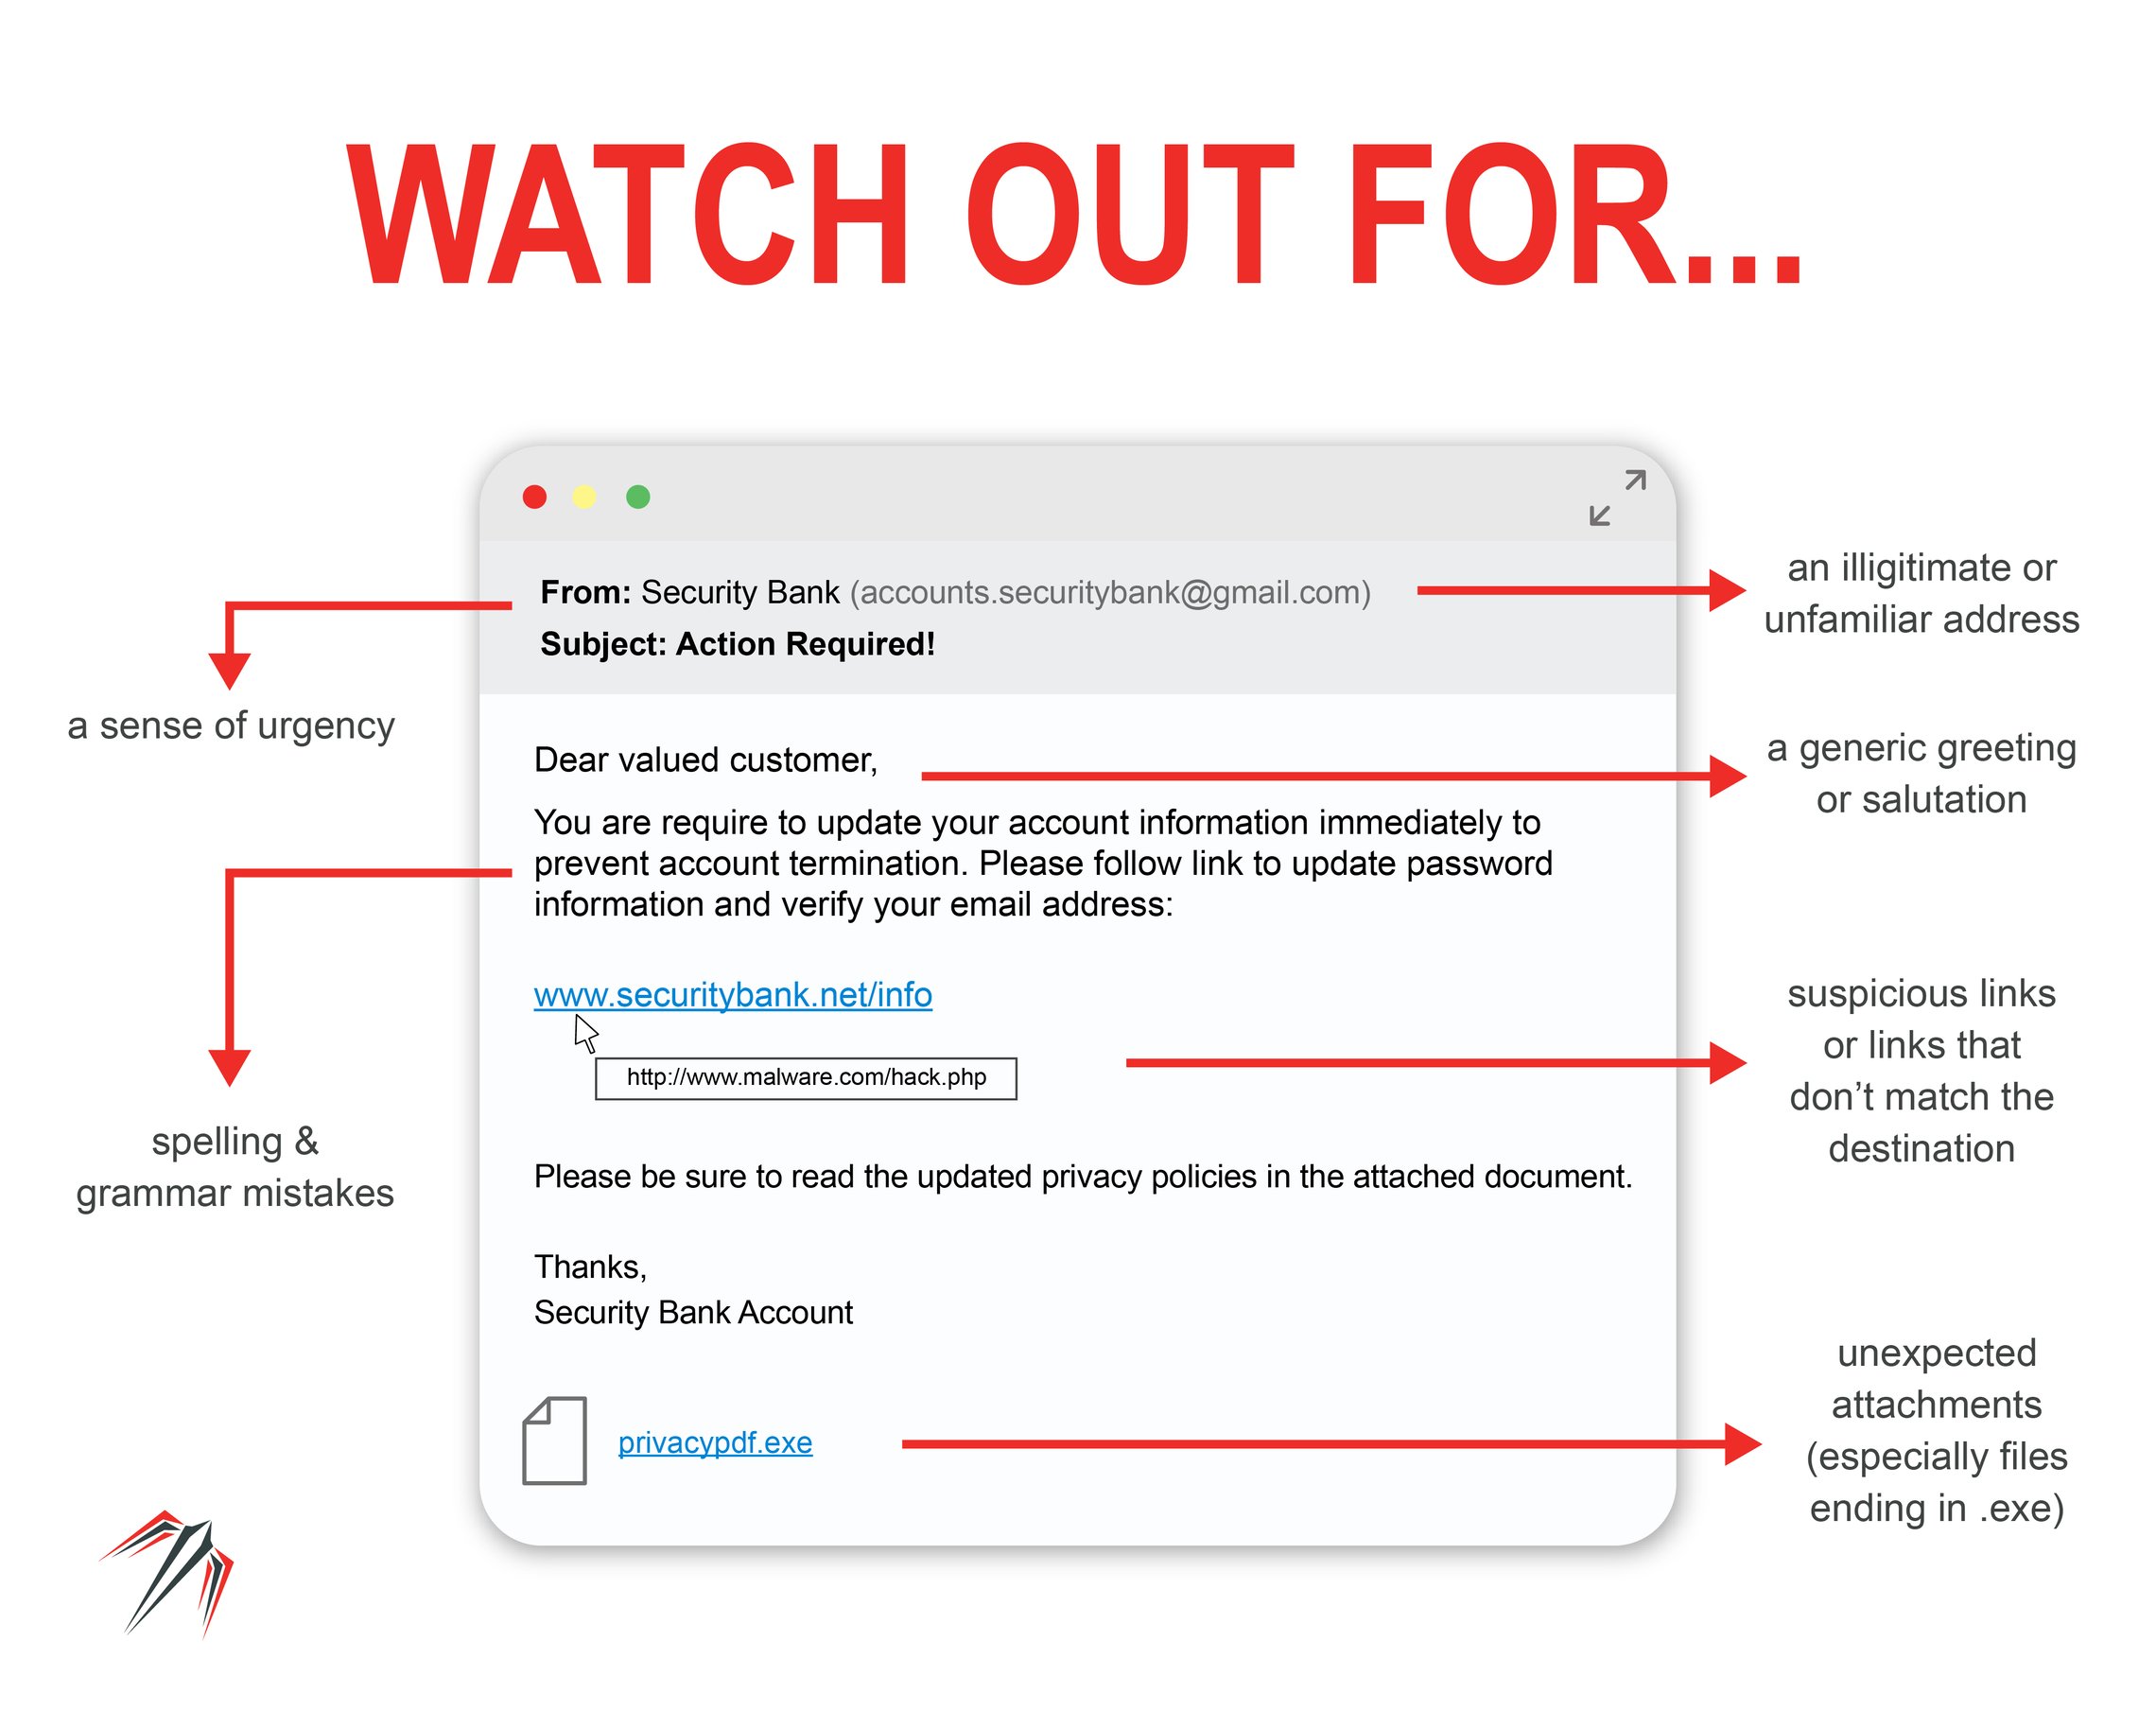 Don’t Get Hooked! 7 Signs of a Phishing Email